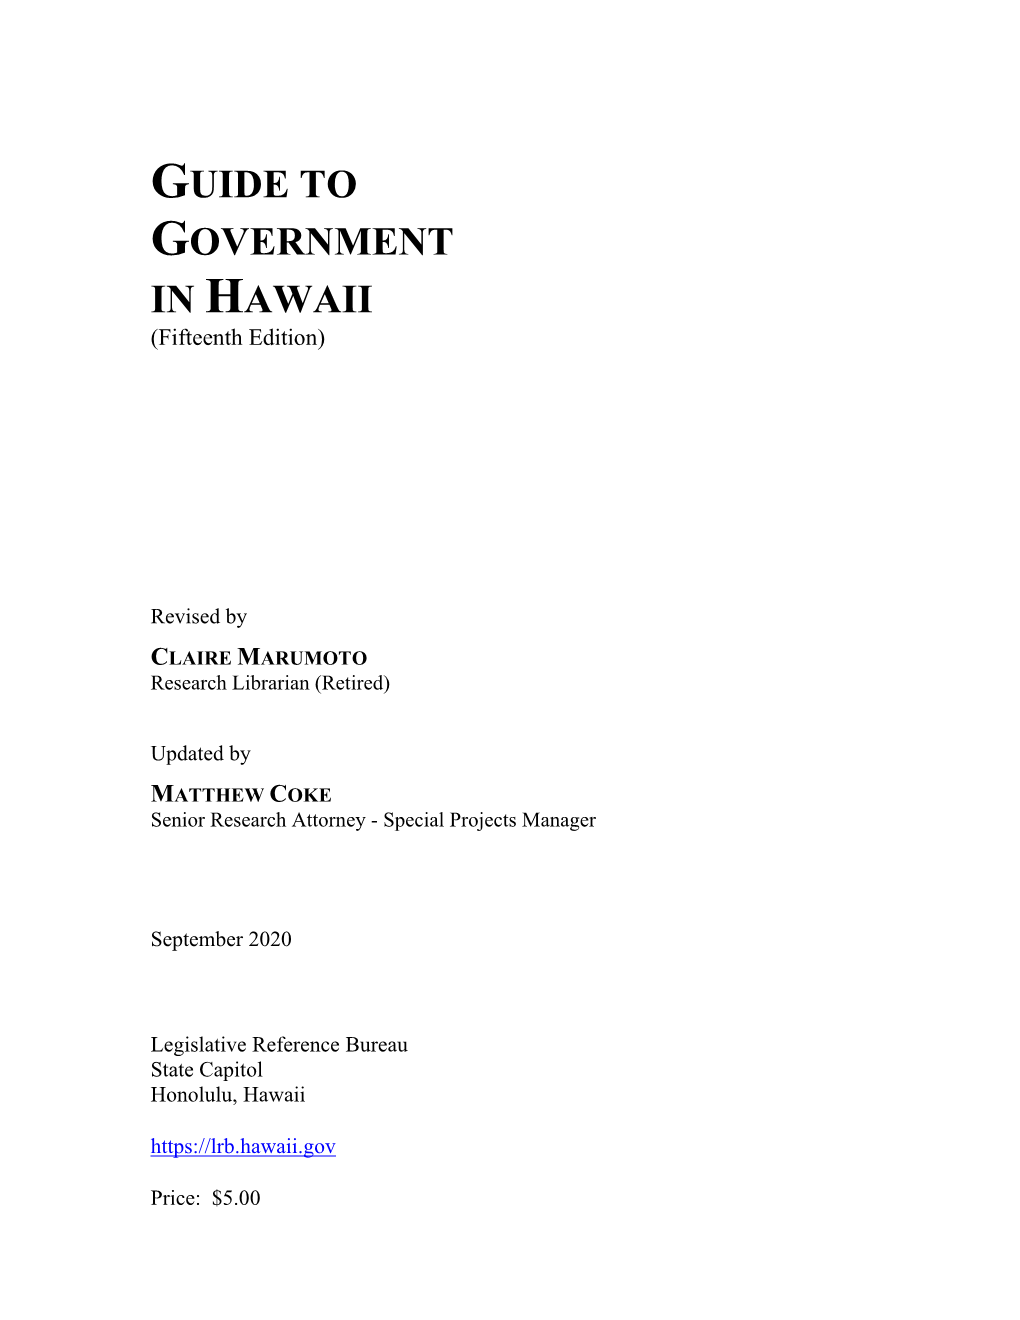 GUIDE to GOVERNMENT in HAWAII (Fifteenth Edition)